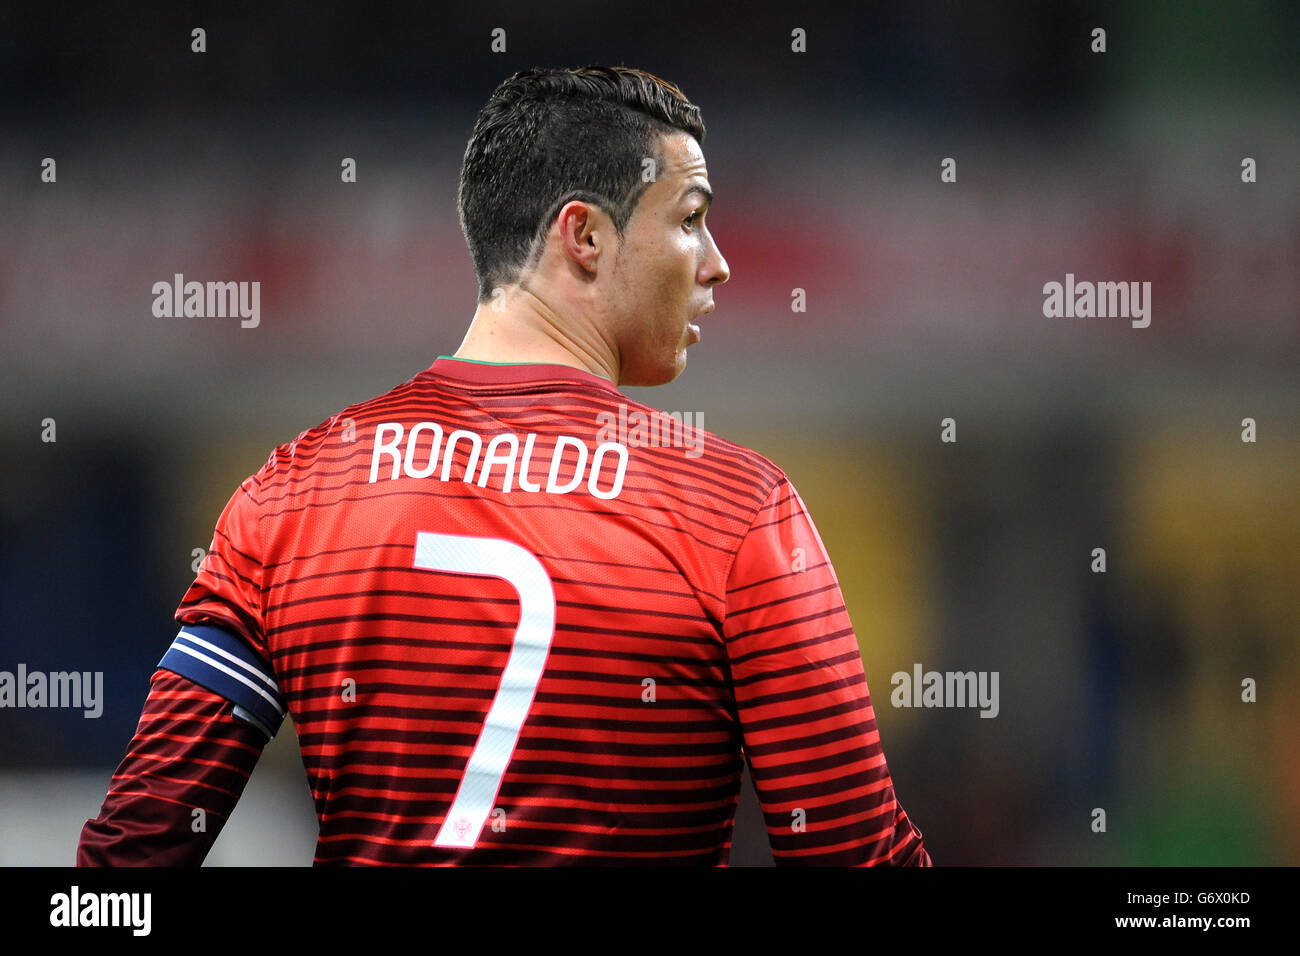 Cristiano Ronaldo Portugal High Resolution Stock Photography and Images -  Alamy